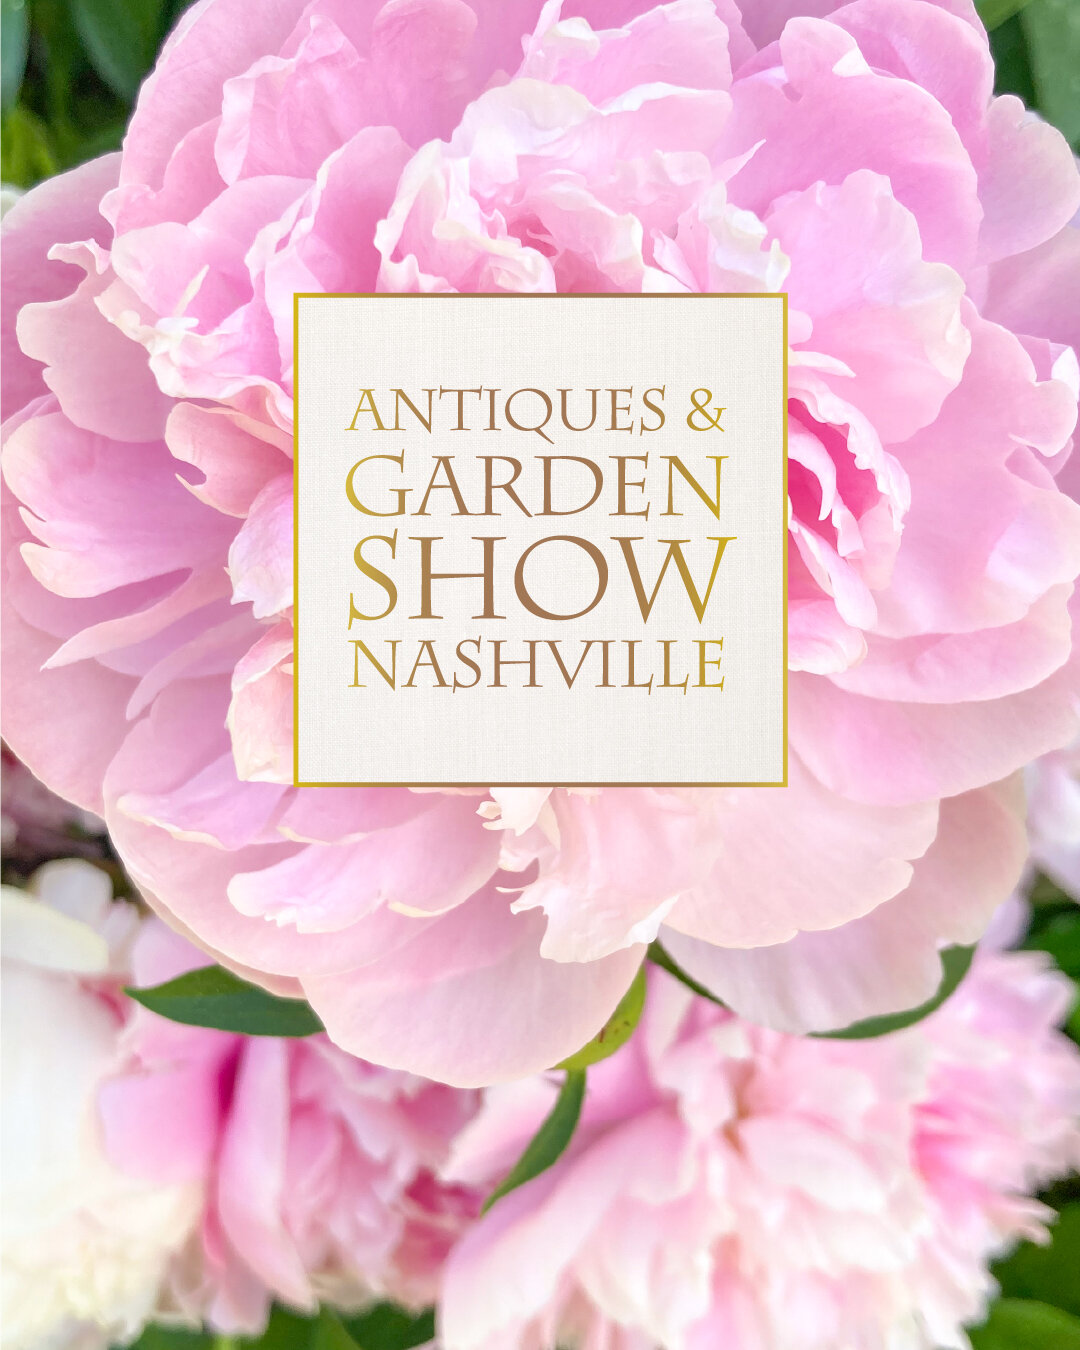 Peony's Envy is so happy to be able to return to the Antiques &amp; Garden Show Nashville and we hope you will join us! This show is worth a road trip - stunning antiques, beautiful gardens, glorious parties, fabulous speakers. January 12-14. Find Pe